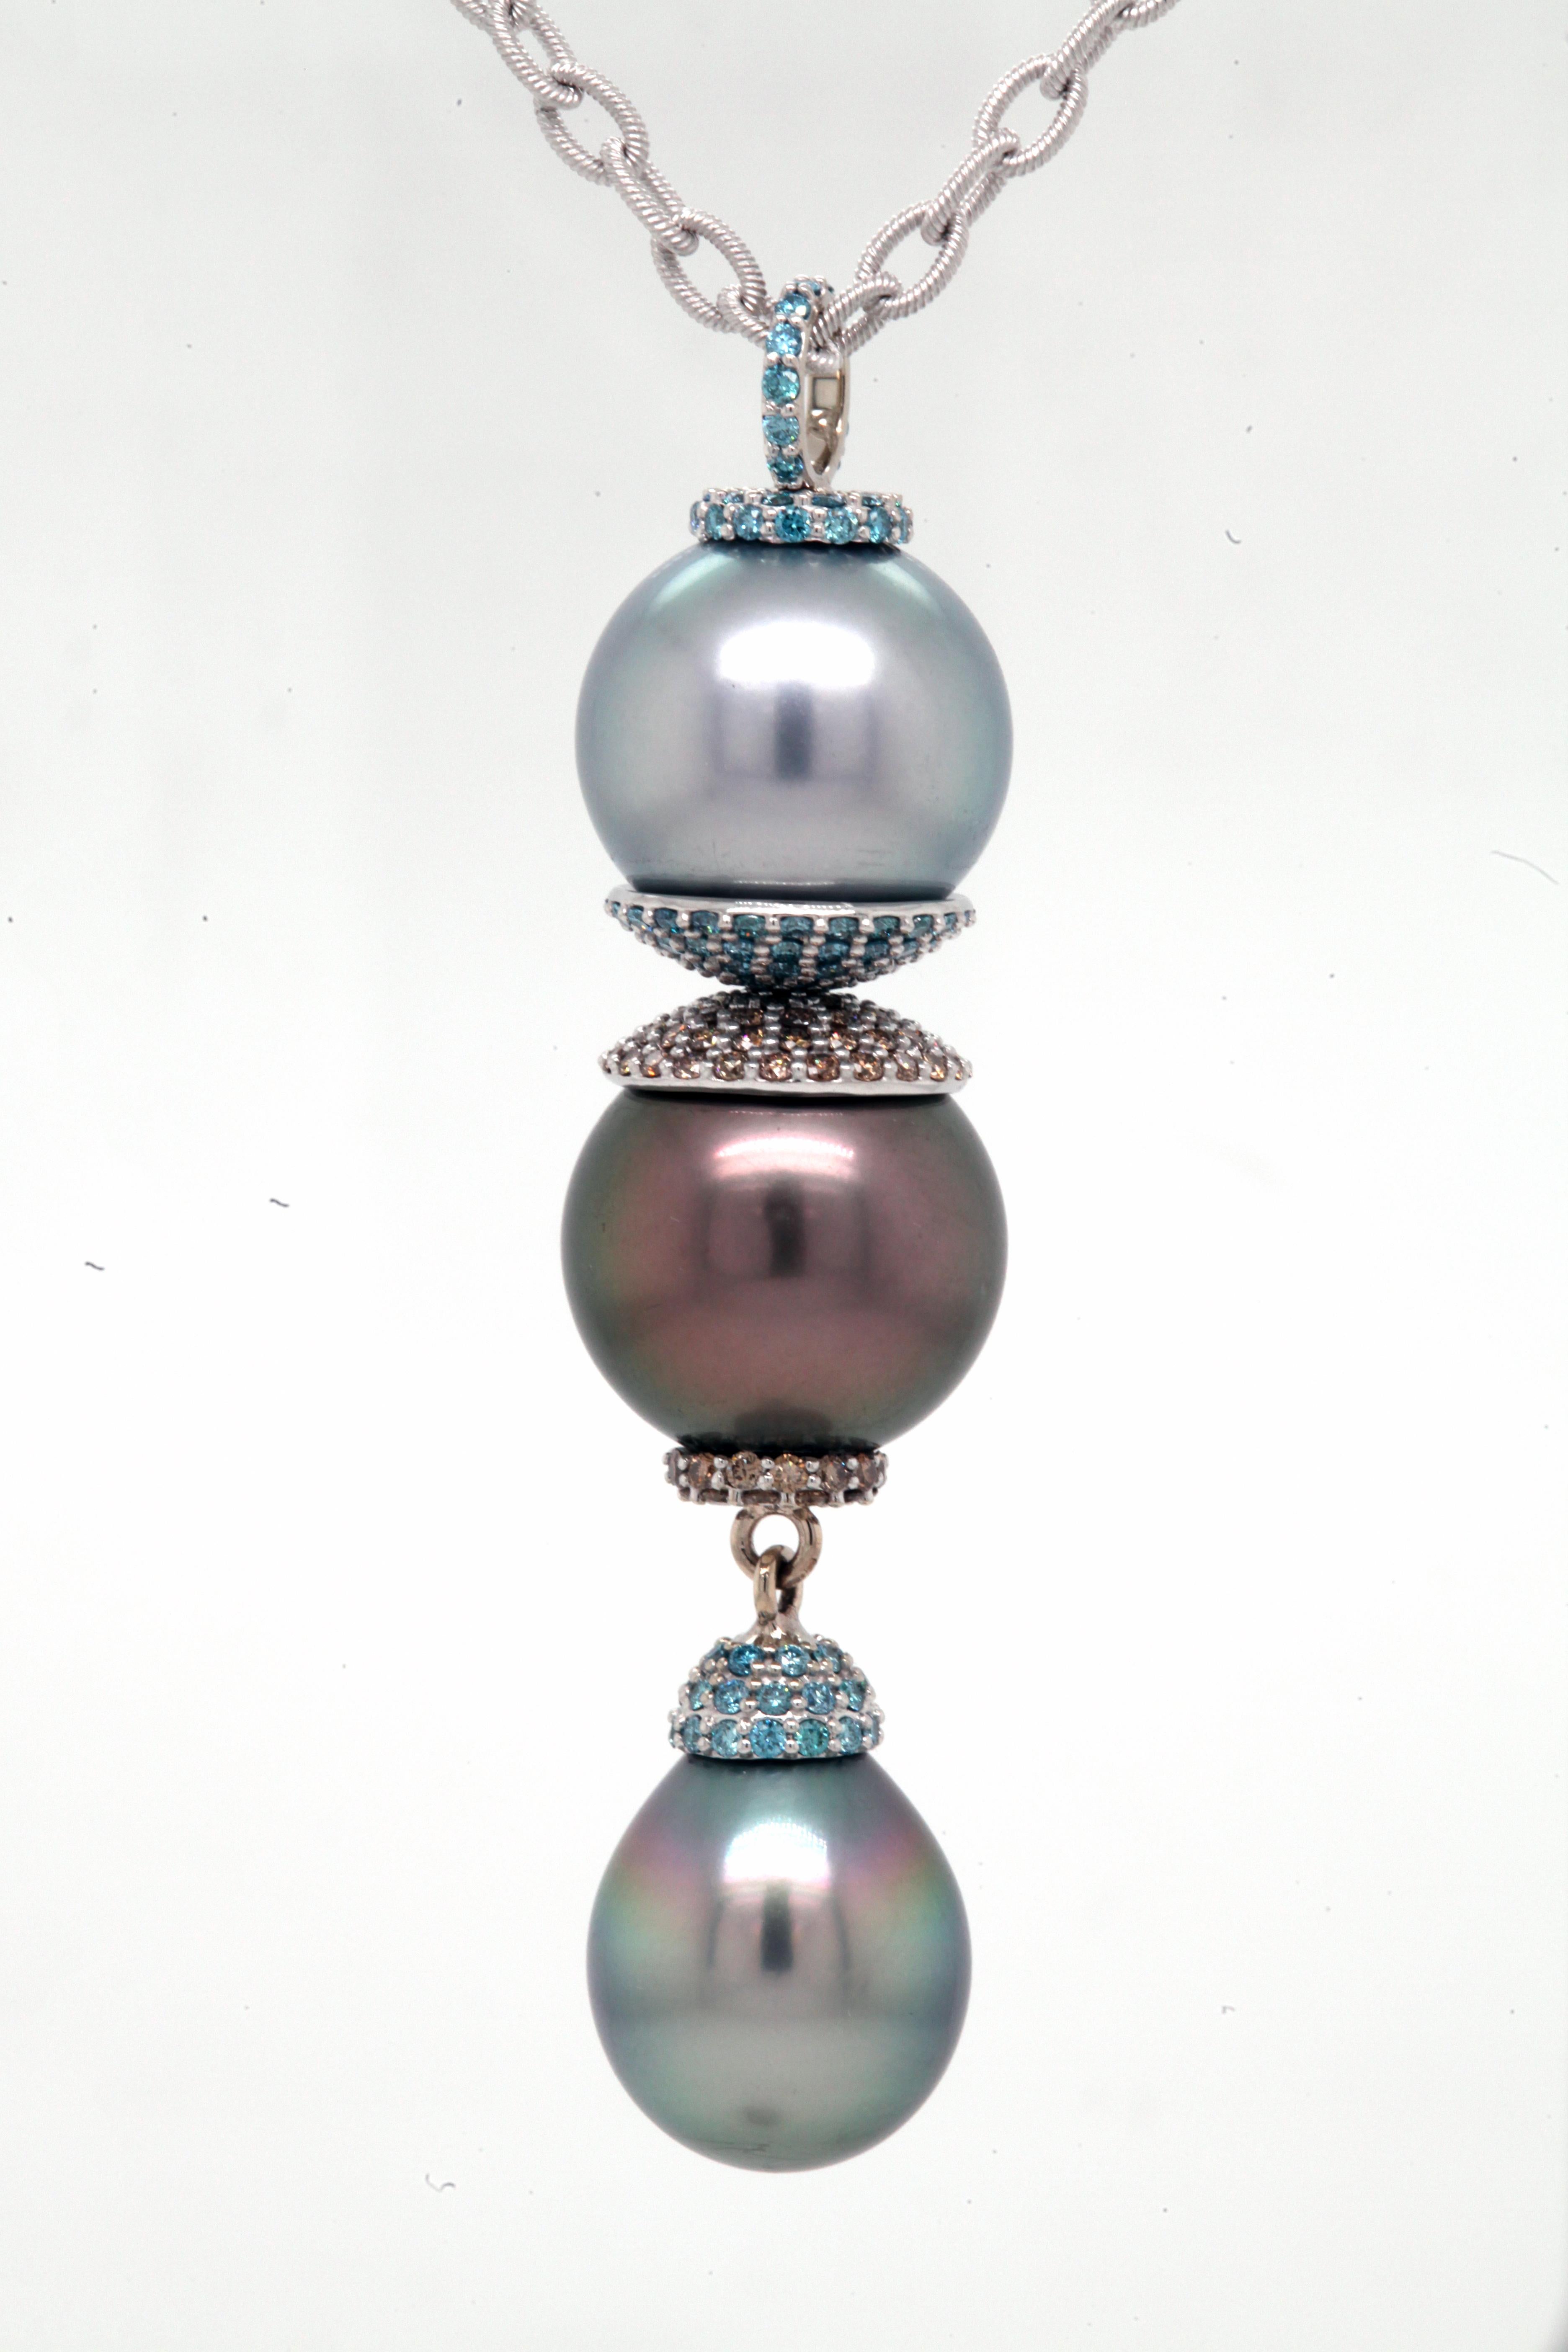 An 18k white gold triple drop pearl pendant set with Tahitian pearls, one light grey/blue,14.07mm, one dark grey/brown,14.44mm, and one bluish green teardrop shape, 12.5mm x 15.5mm. Also set with 1.088 carats of 1.2mm aqua blue diamonds, and .704